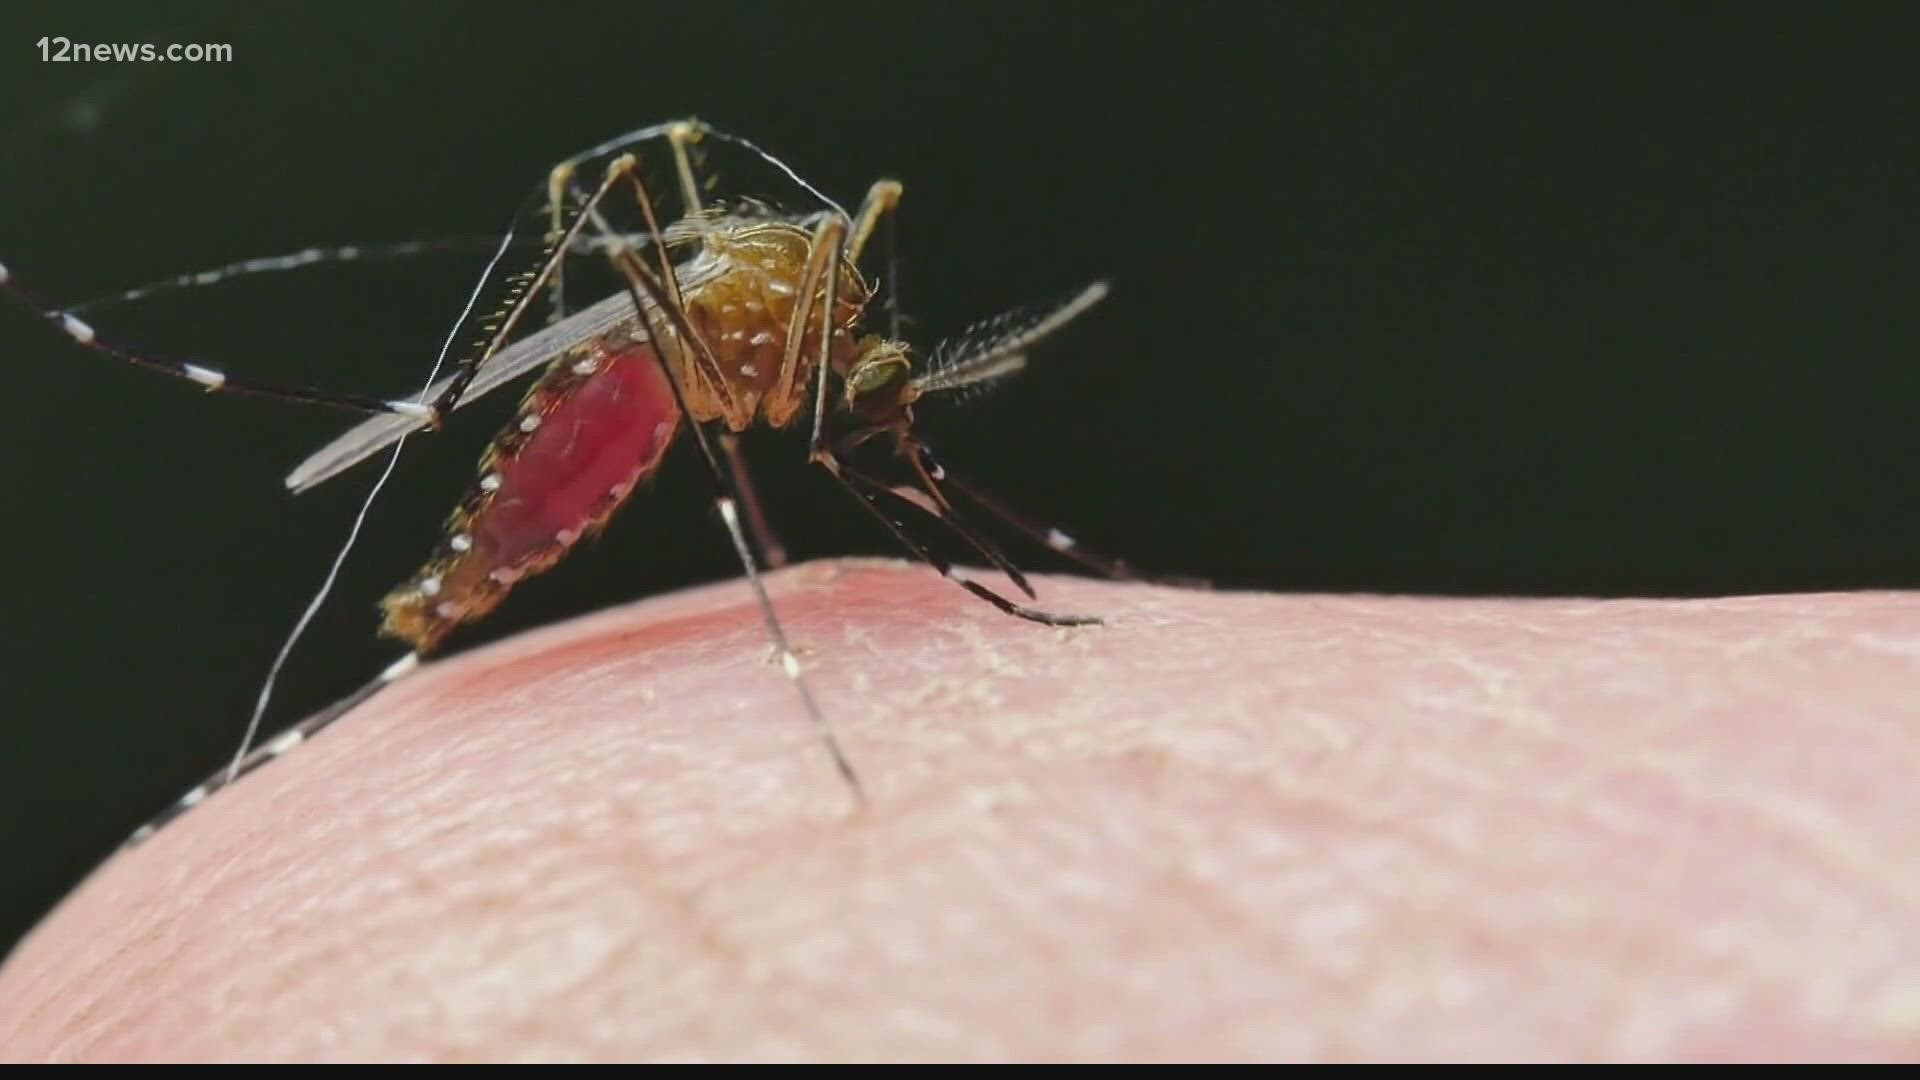 According to experts, mosquitos infected with West Nile Virus are living and biting all over the Valley. Maricopa County is working to combat the insects.